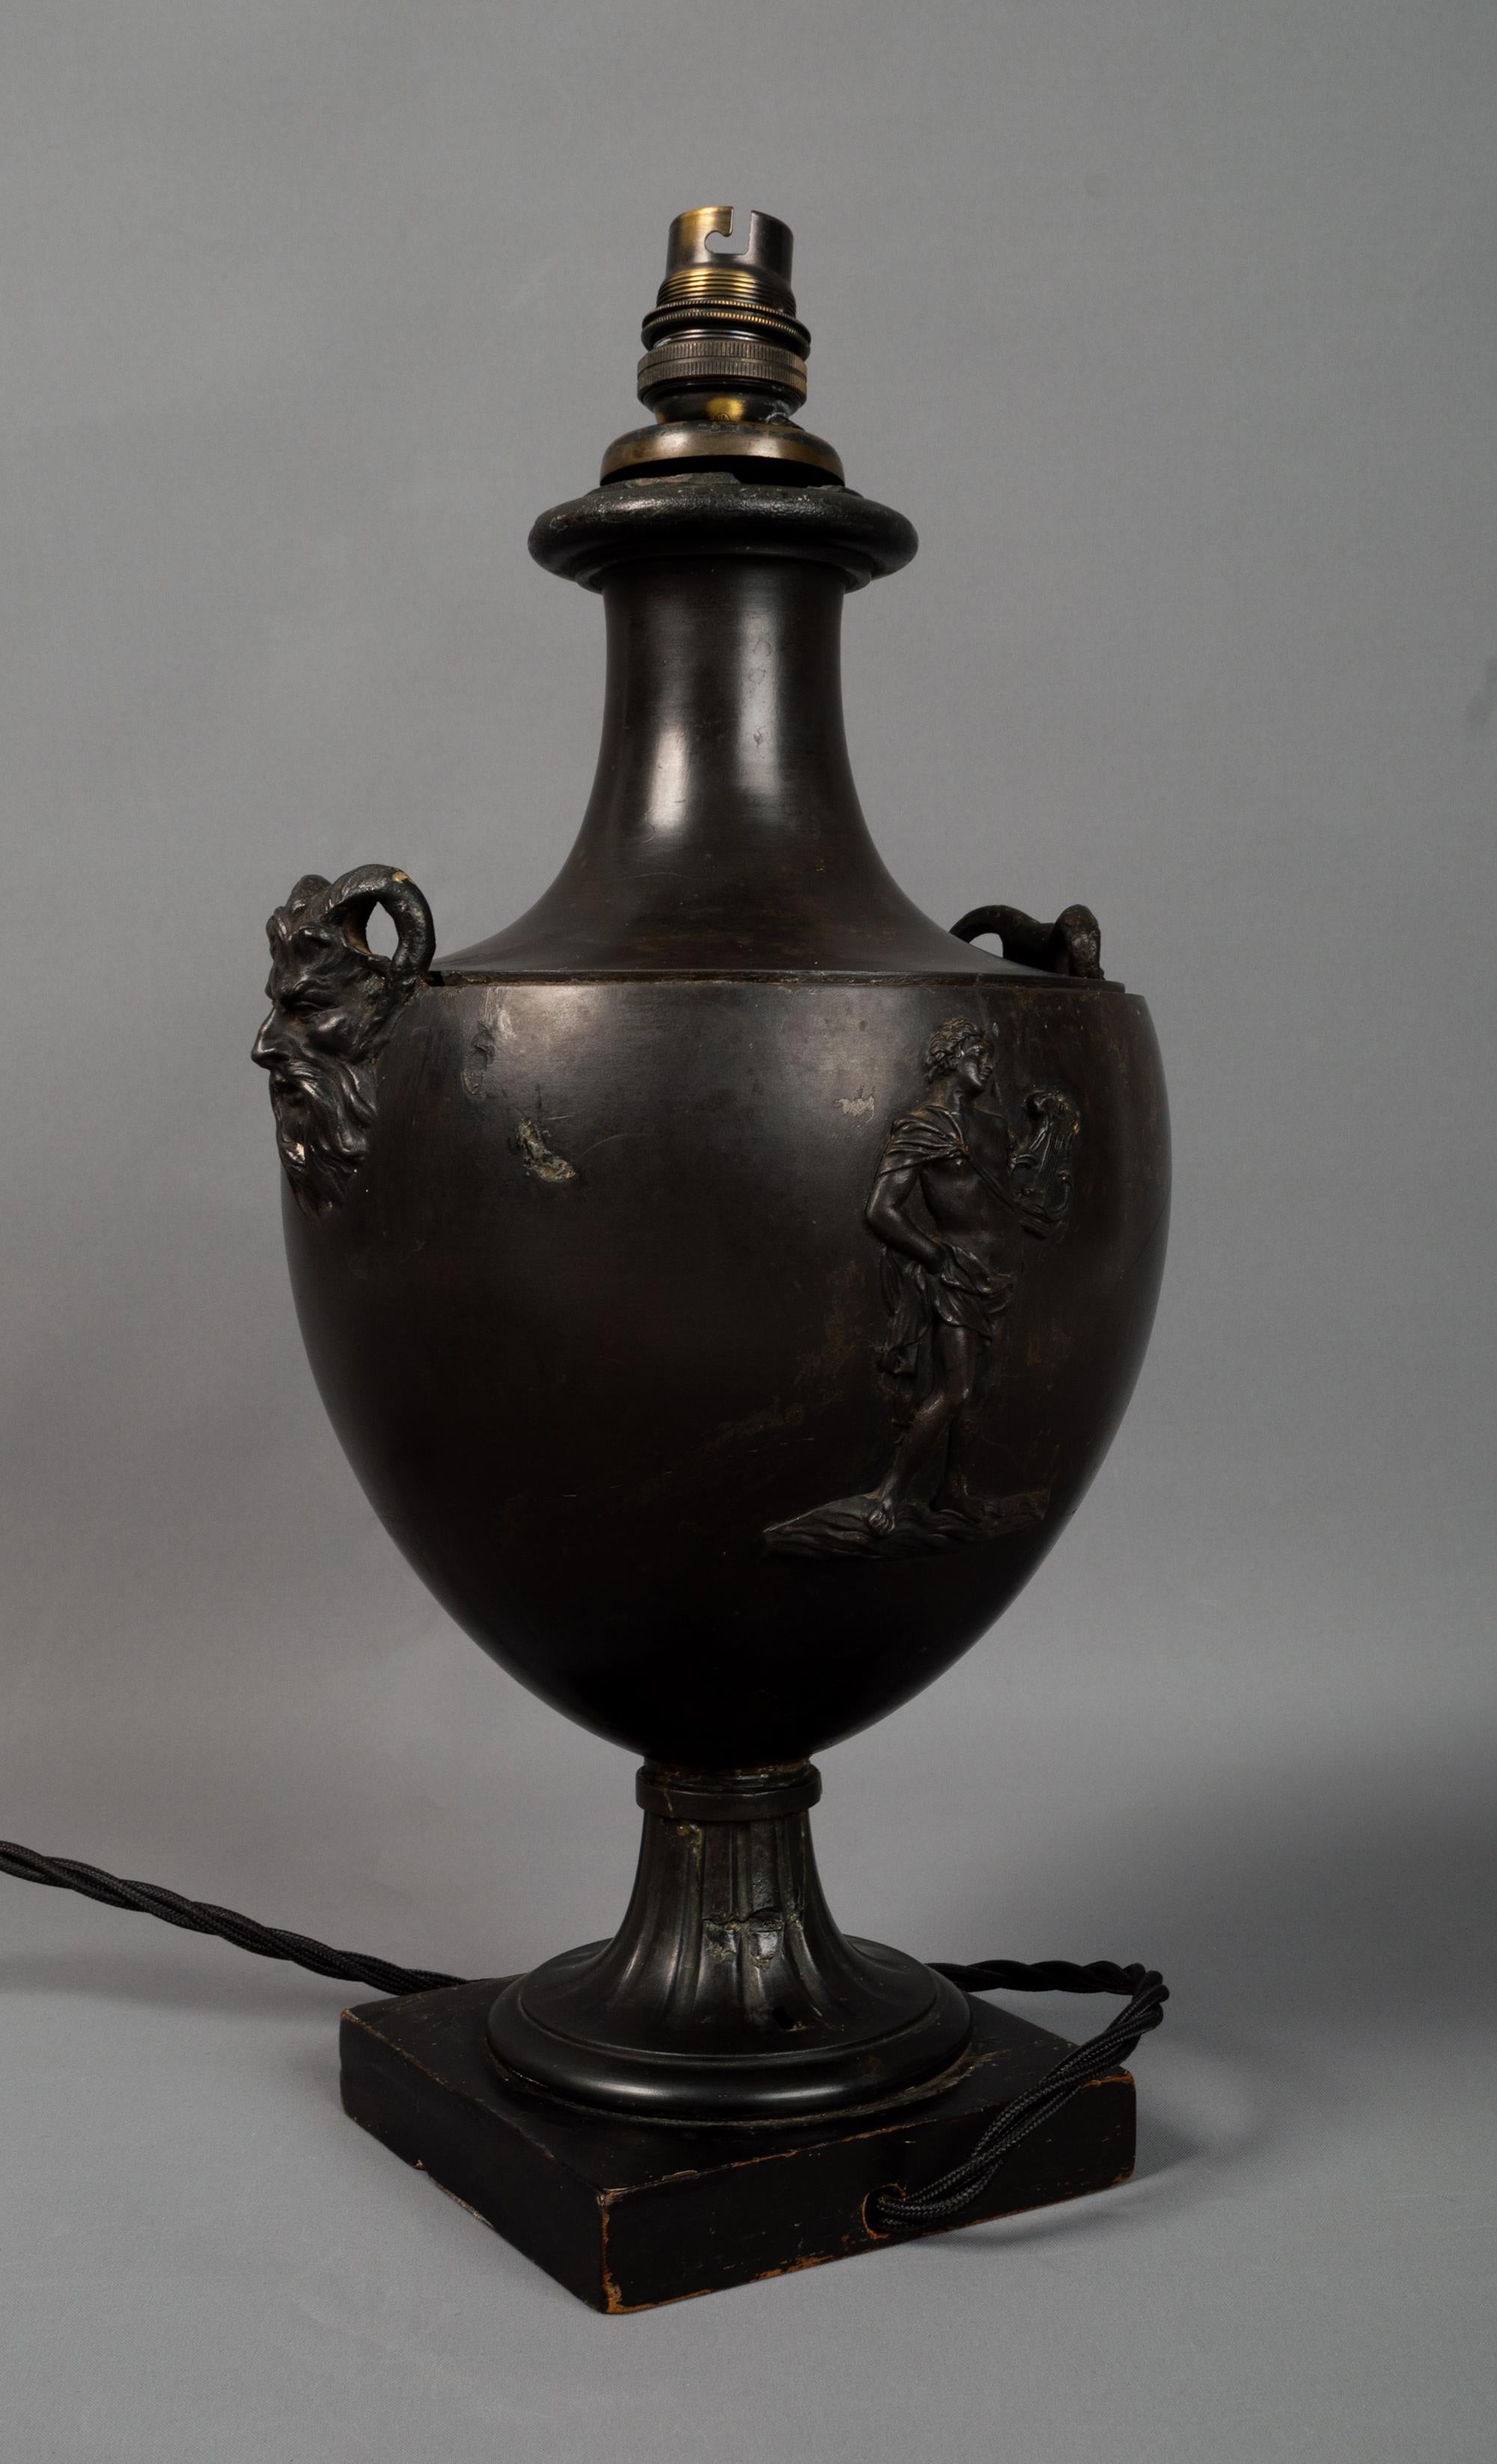 Antique 19th century neoclassical revival vase lamp Germany C.1880.

A Neoclassical style vase converted to a table lamp, black earthenware with faun mask handles, two classical figures in relief to the side, on a circular footed base, mounted on